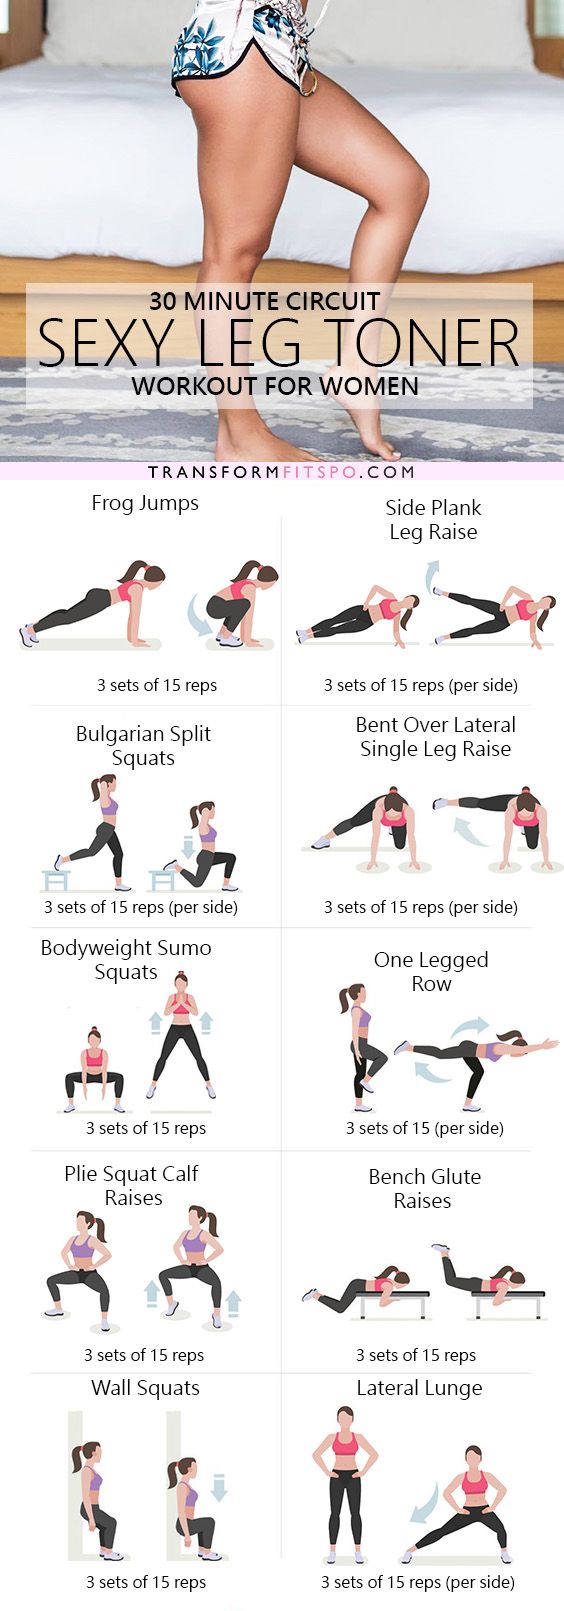 34 Amazing Weight Loss Workouts For Women That Can Be Done At Home